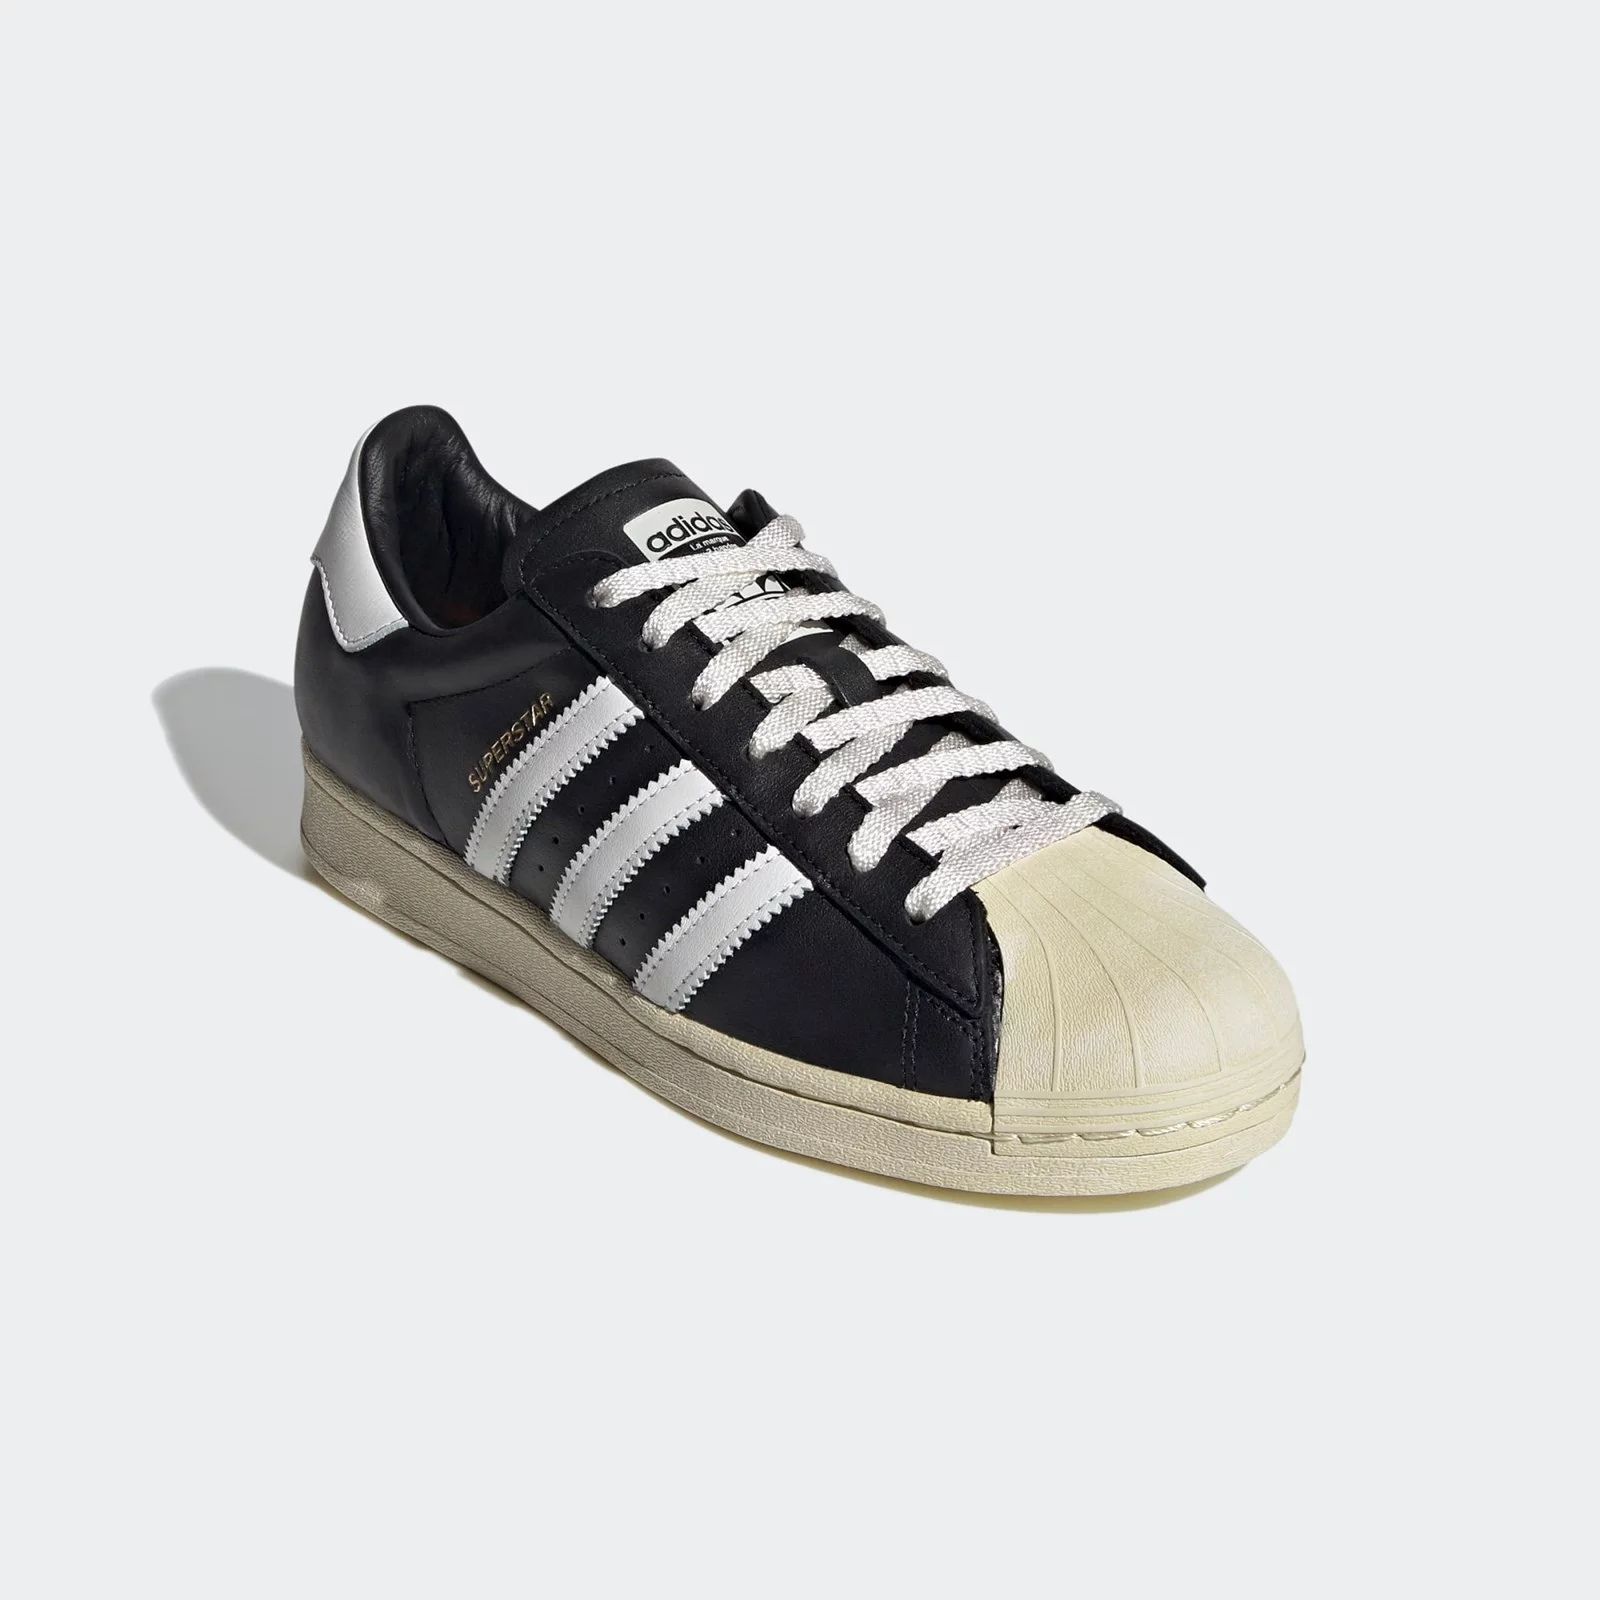 Sneakers adidas Core Black / Crystal White / FV2832